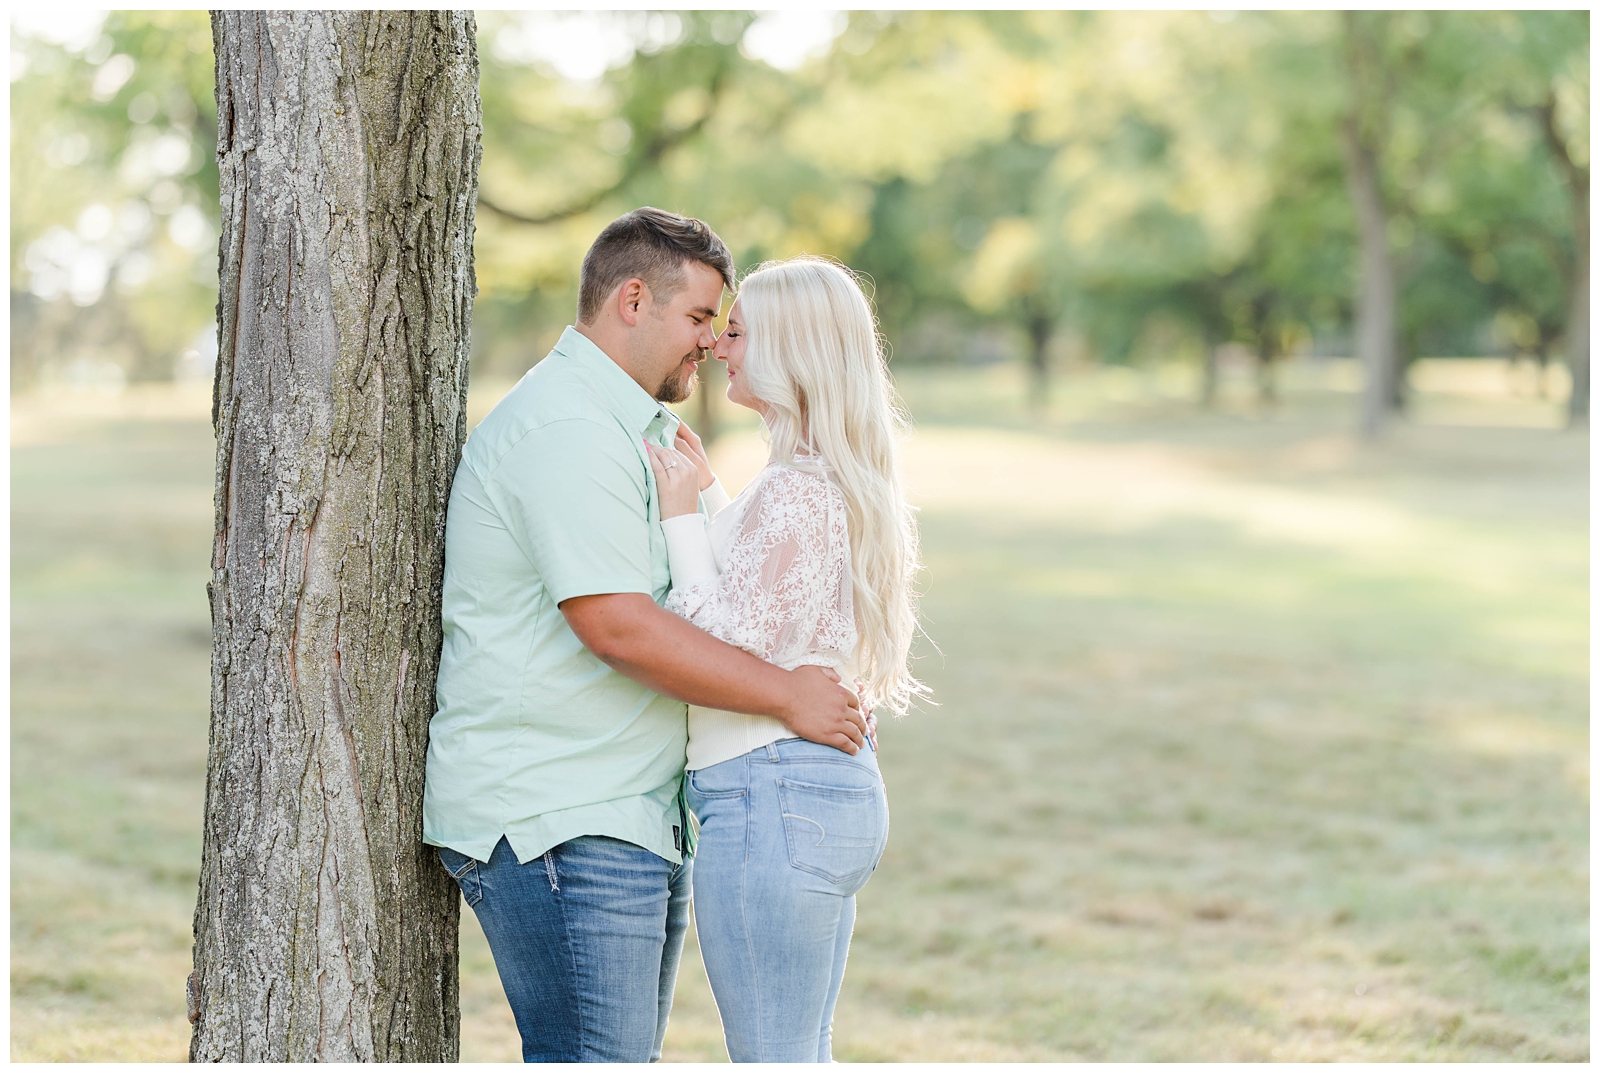 Engagement Session at Michigan State University